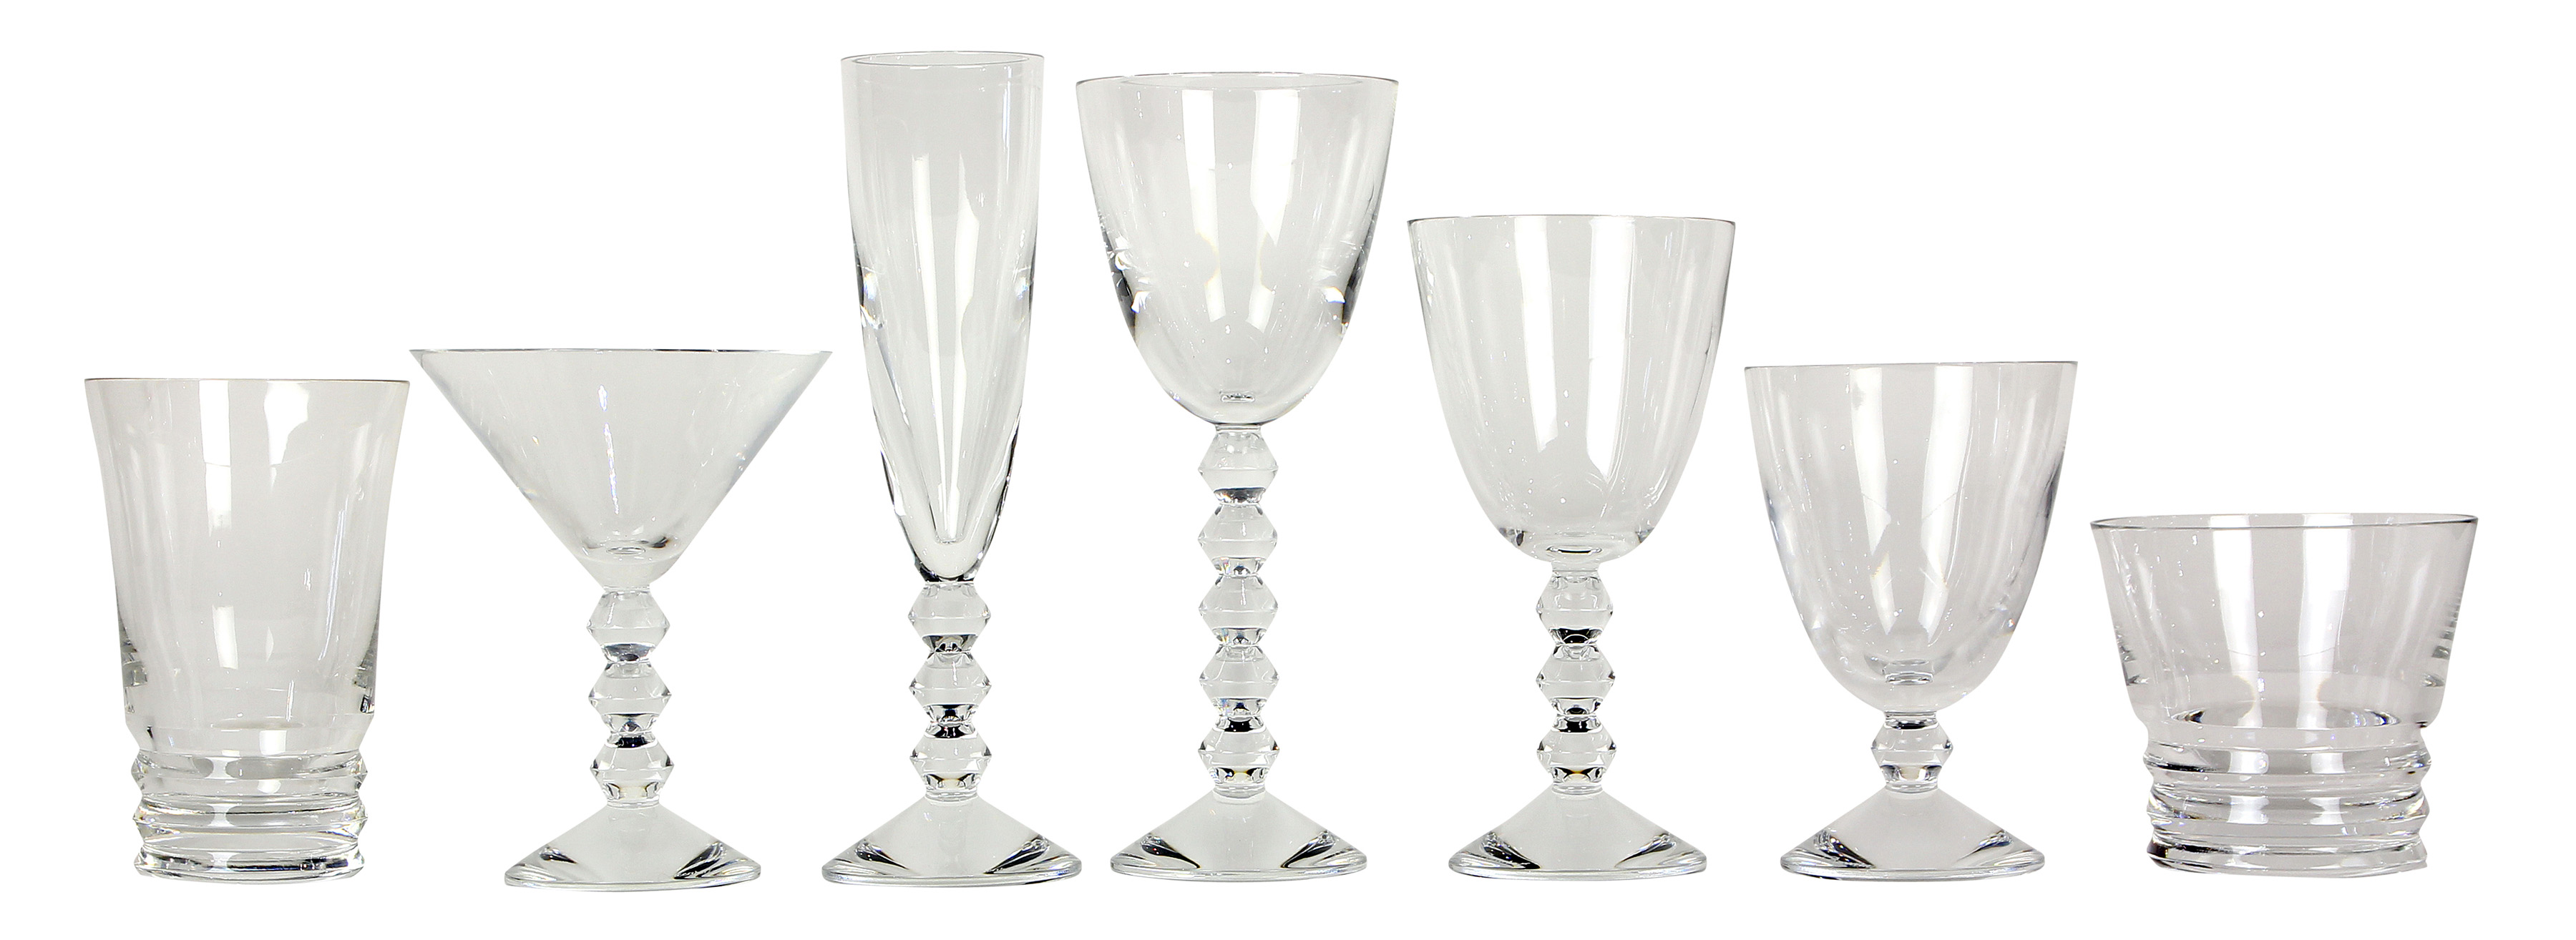 This Baccarat 82-piece stemware service in the Vega pattern far exceeded expectations selling for $10,700. Clars Auction Gallery image